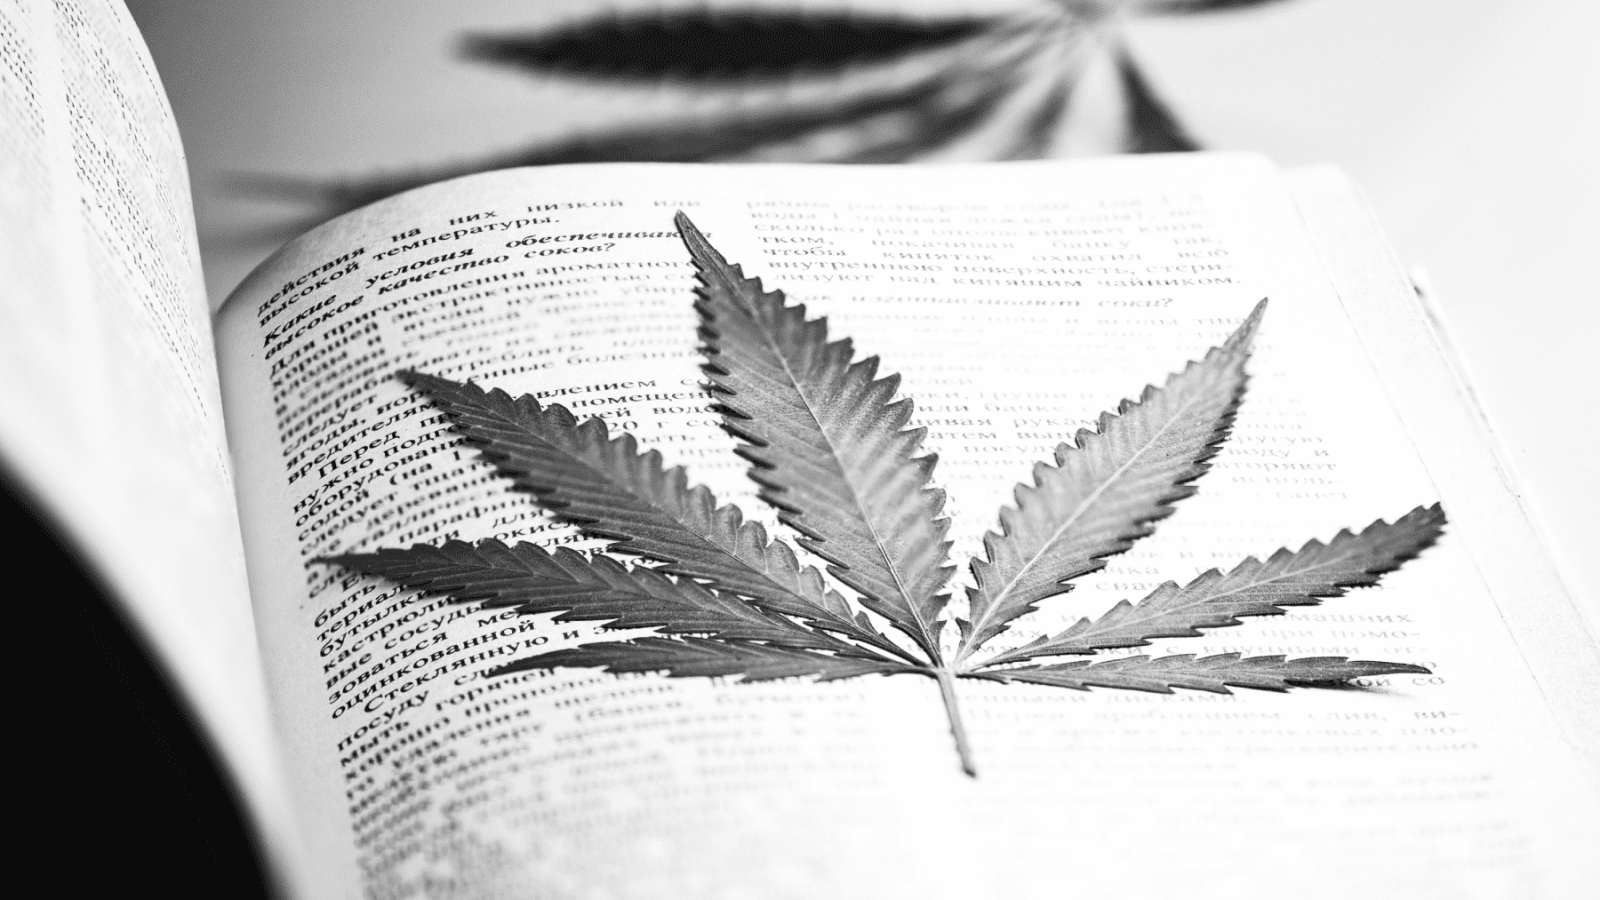 Word Choice Matters: Divisive Cannabinoid Language Can Impact Consumers and Companies